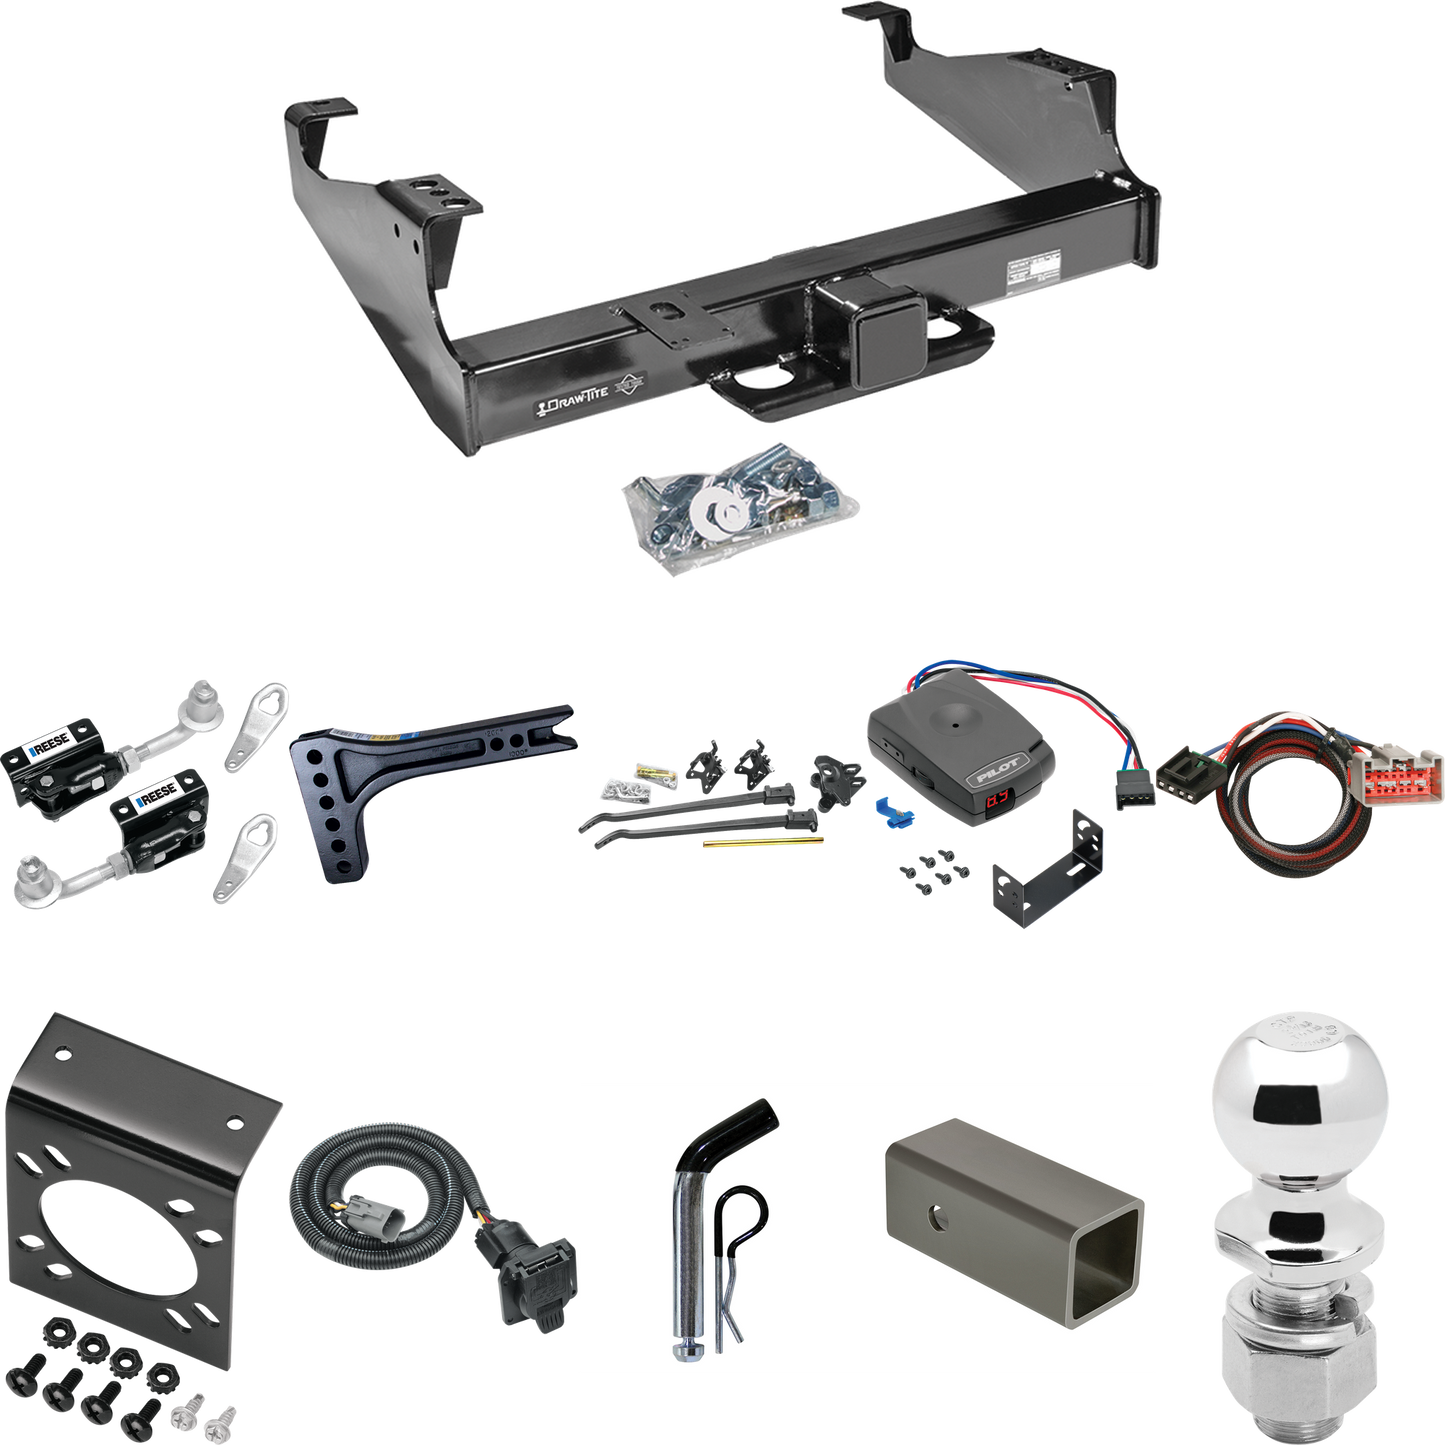 Fits 1999-2000 Ford F-350 Super Duty Trailer Hitch Tow PKG w/ 15K Trunnion Bar Weight Distribution Hitch + Pin/Clip + Dual Cam Sway Control + 2-5/16" Ball + Pro Series Pilot Brake Control + Plug & Play BC Adapter + 7-Way RV Wiring (For Cab & Chassis,